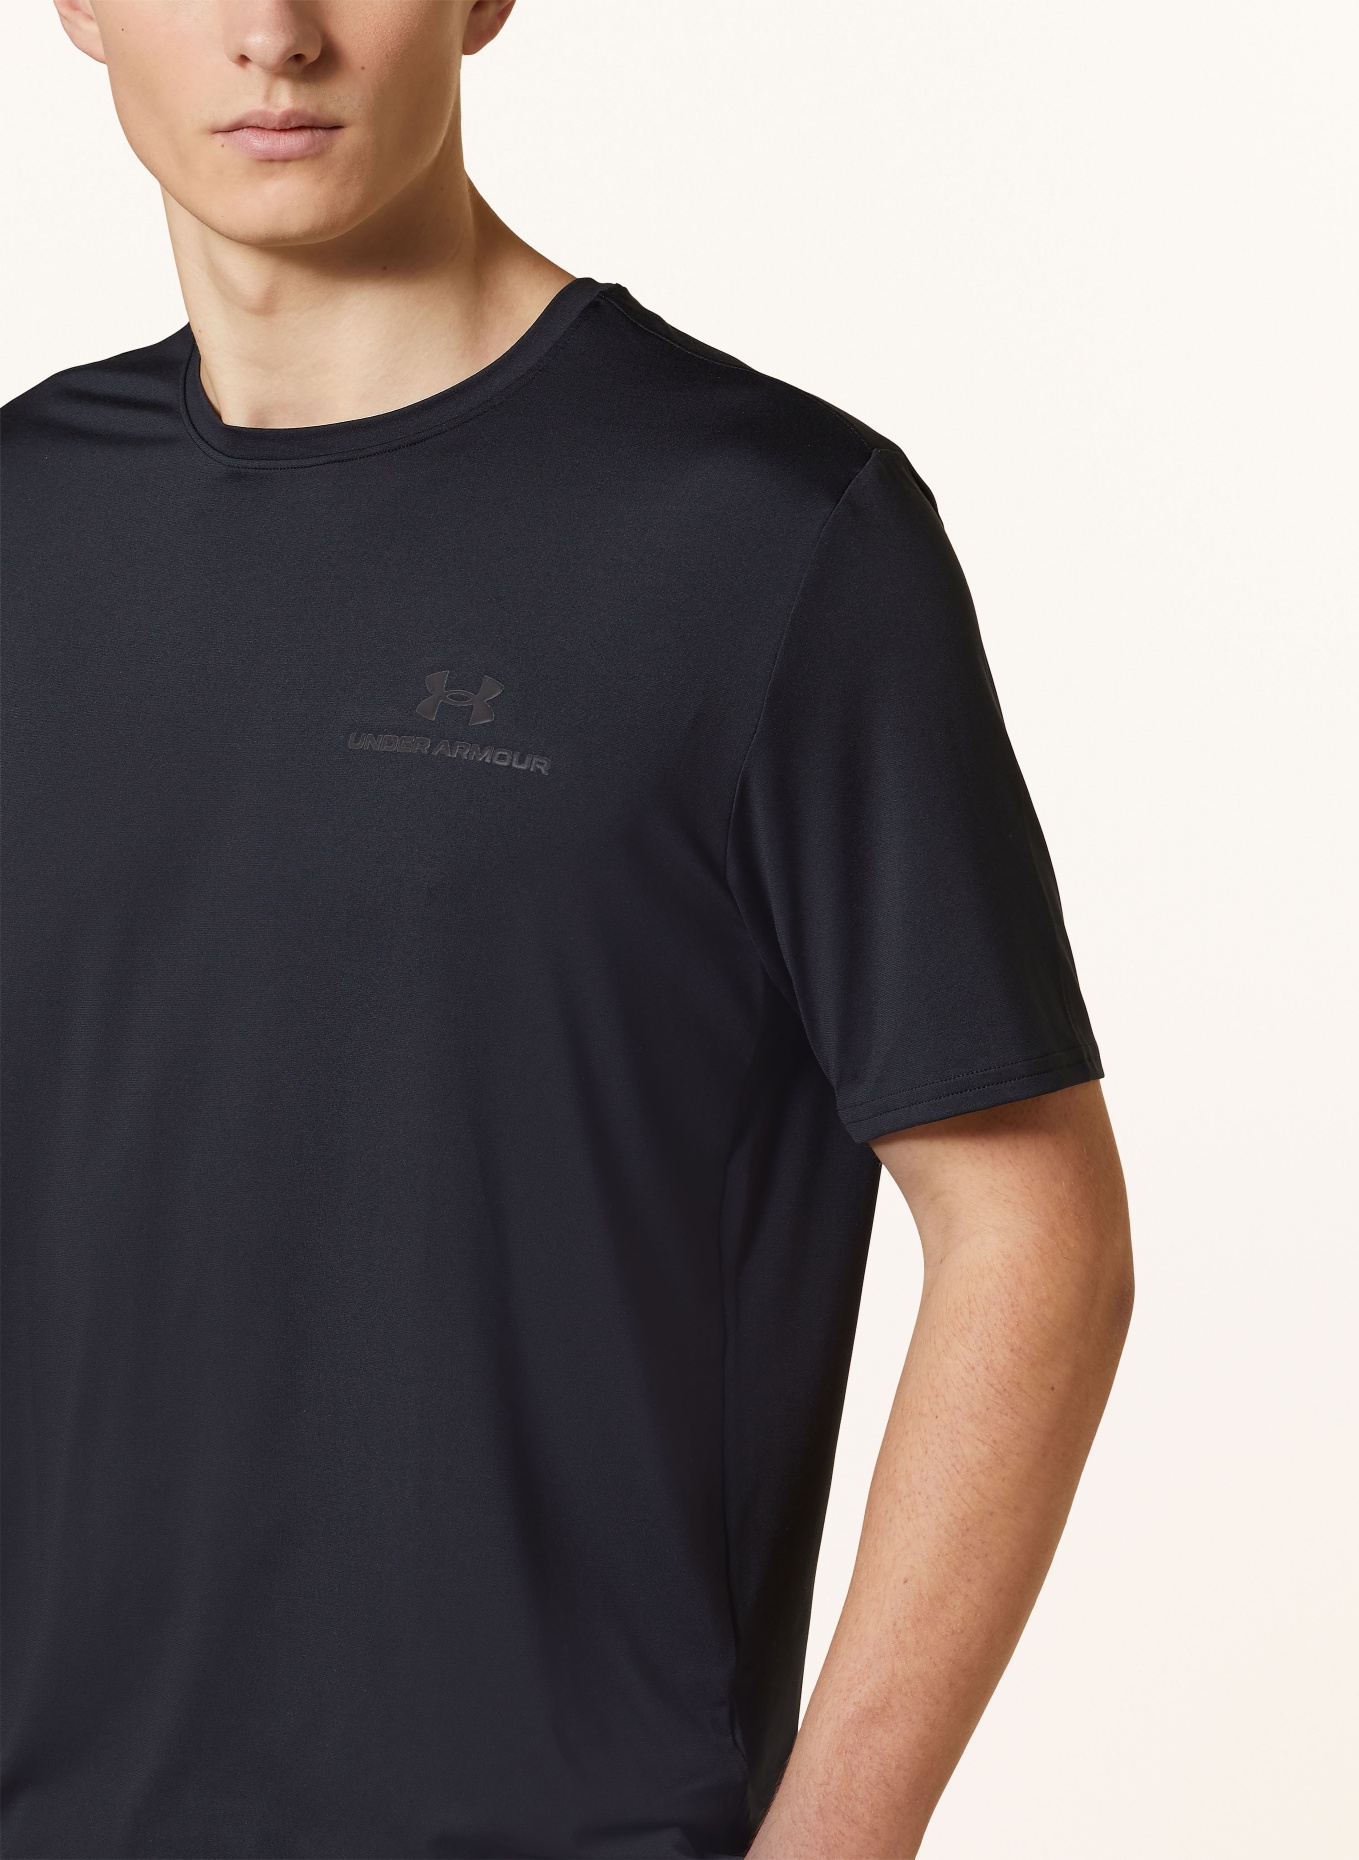 Under Armour Rush Energy t-shirt in black